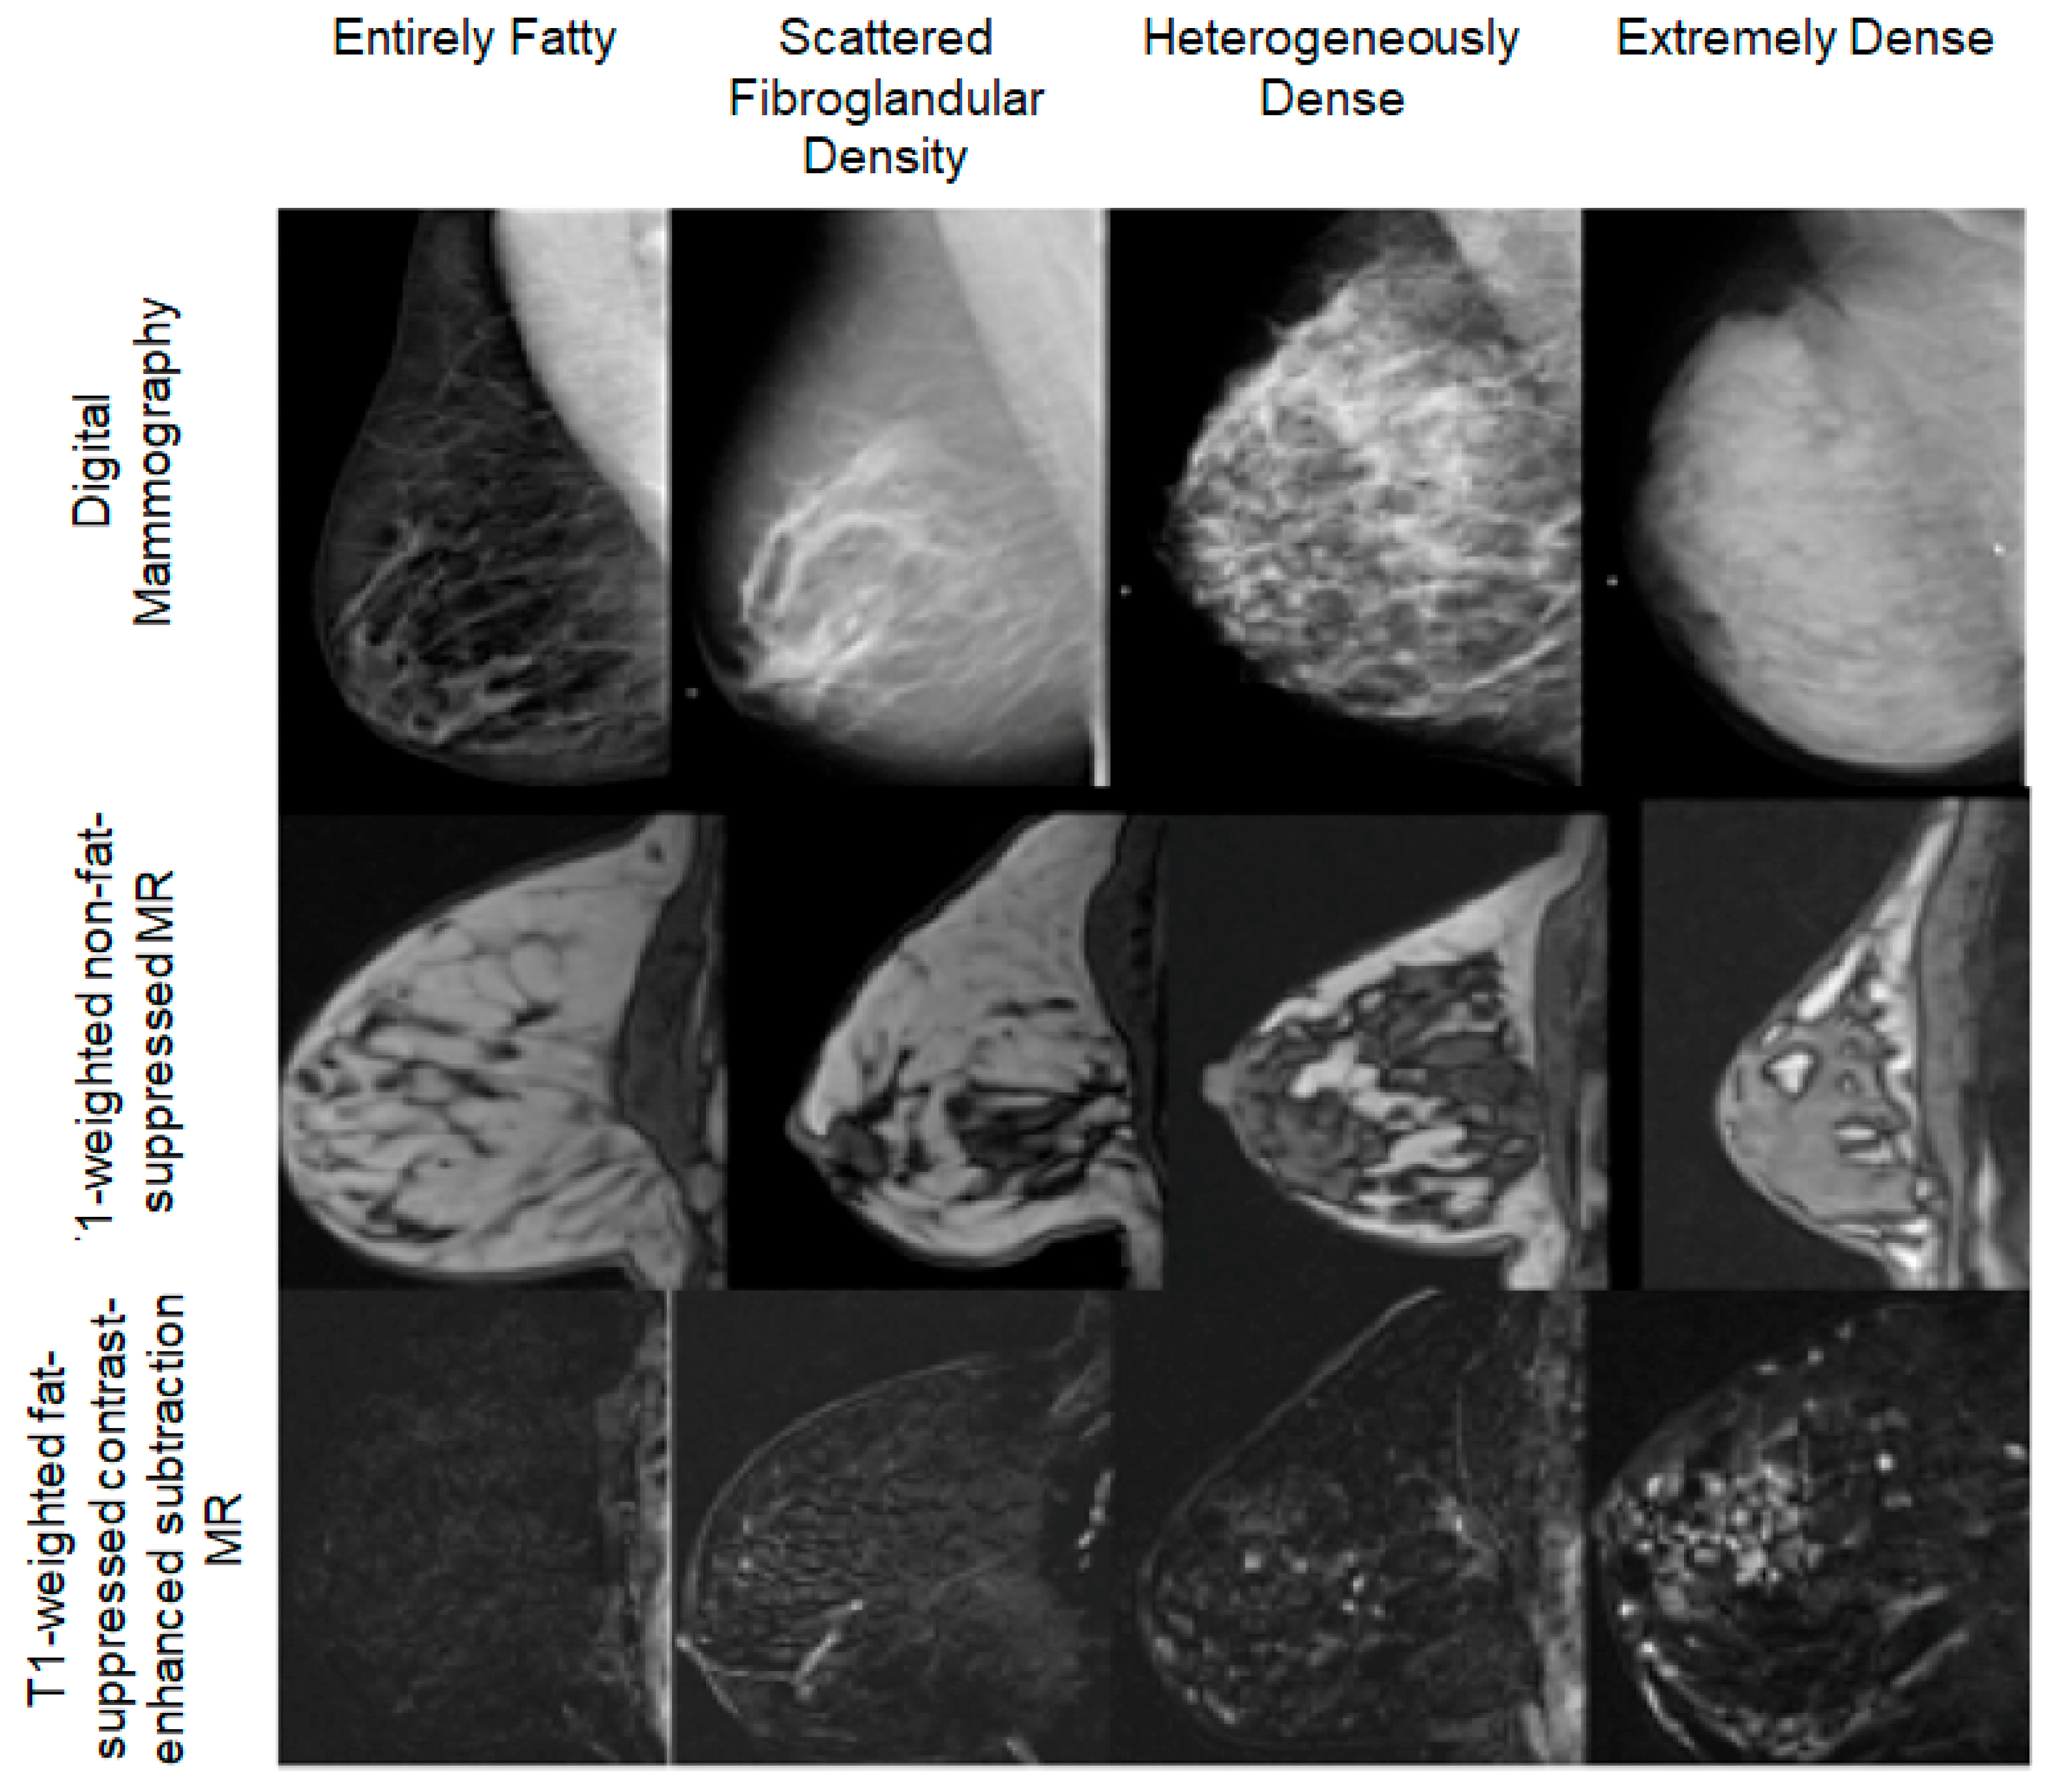 Breast CT developers aim to 'revolutionize' mammography